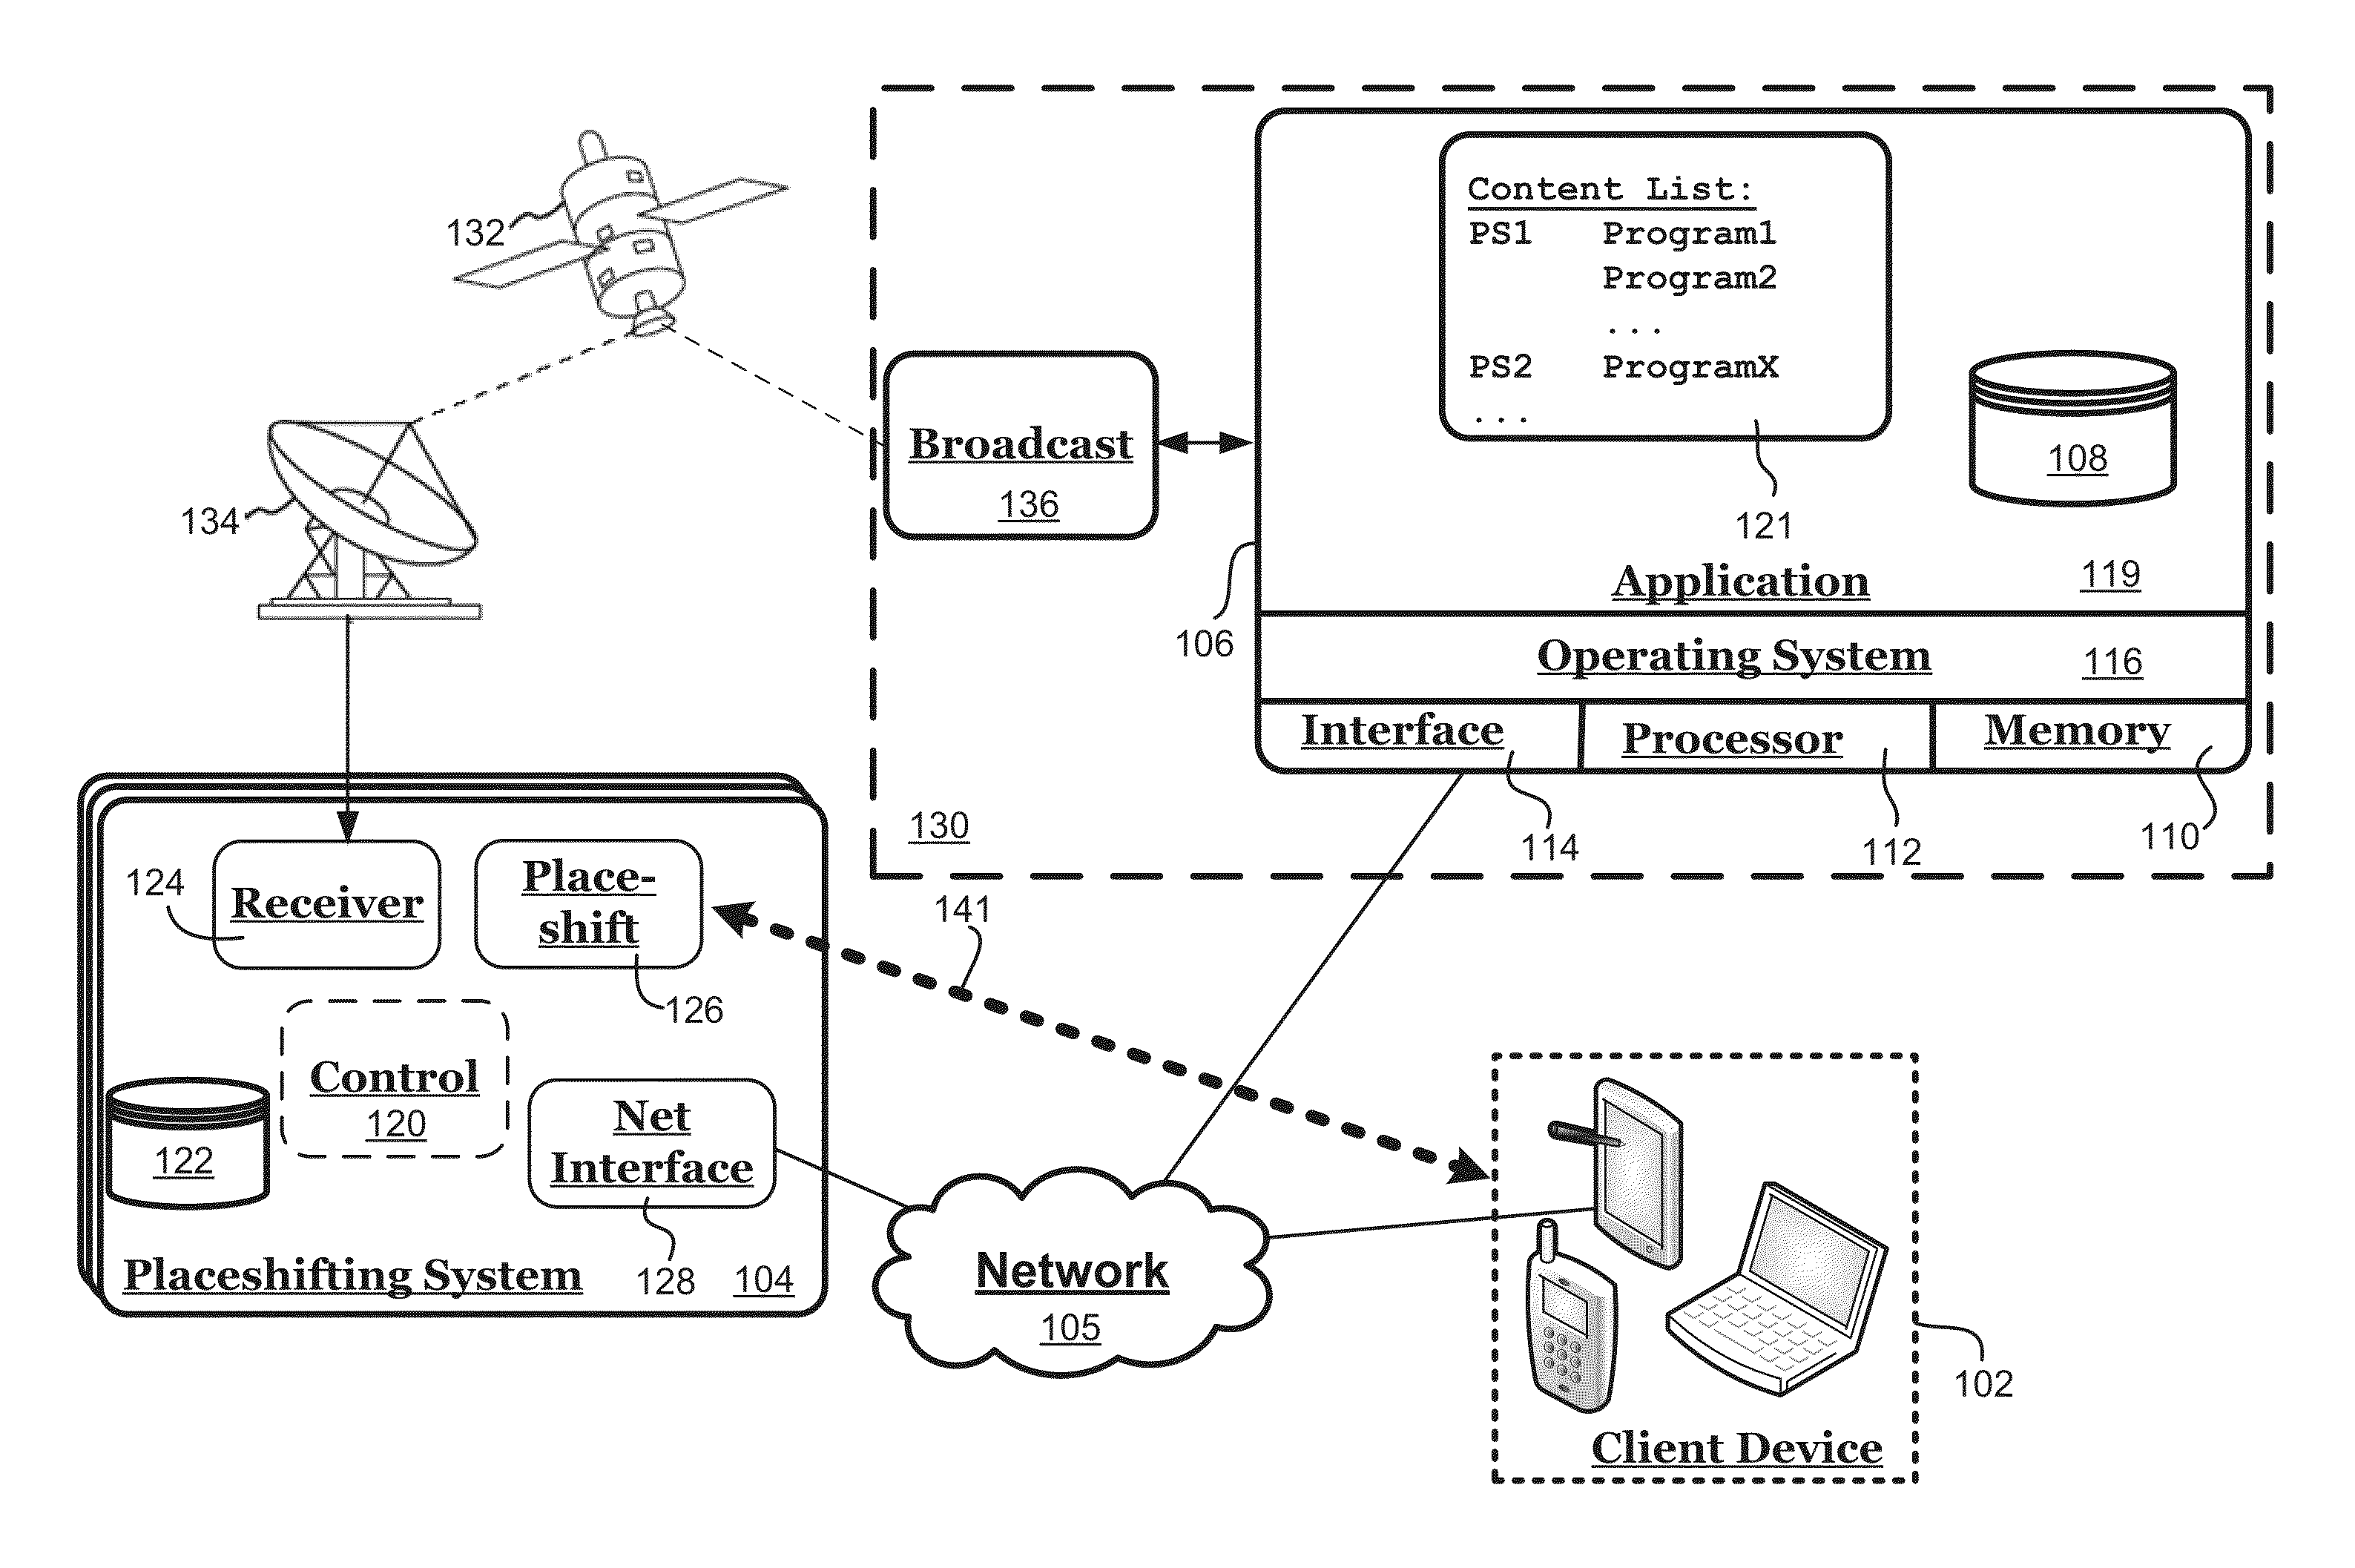 Systems and methods for distributed access to media content using placeshifting